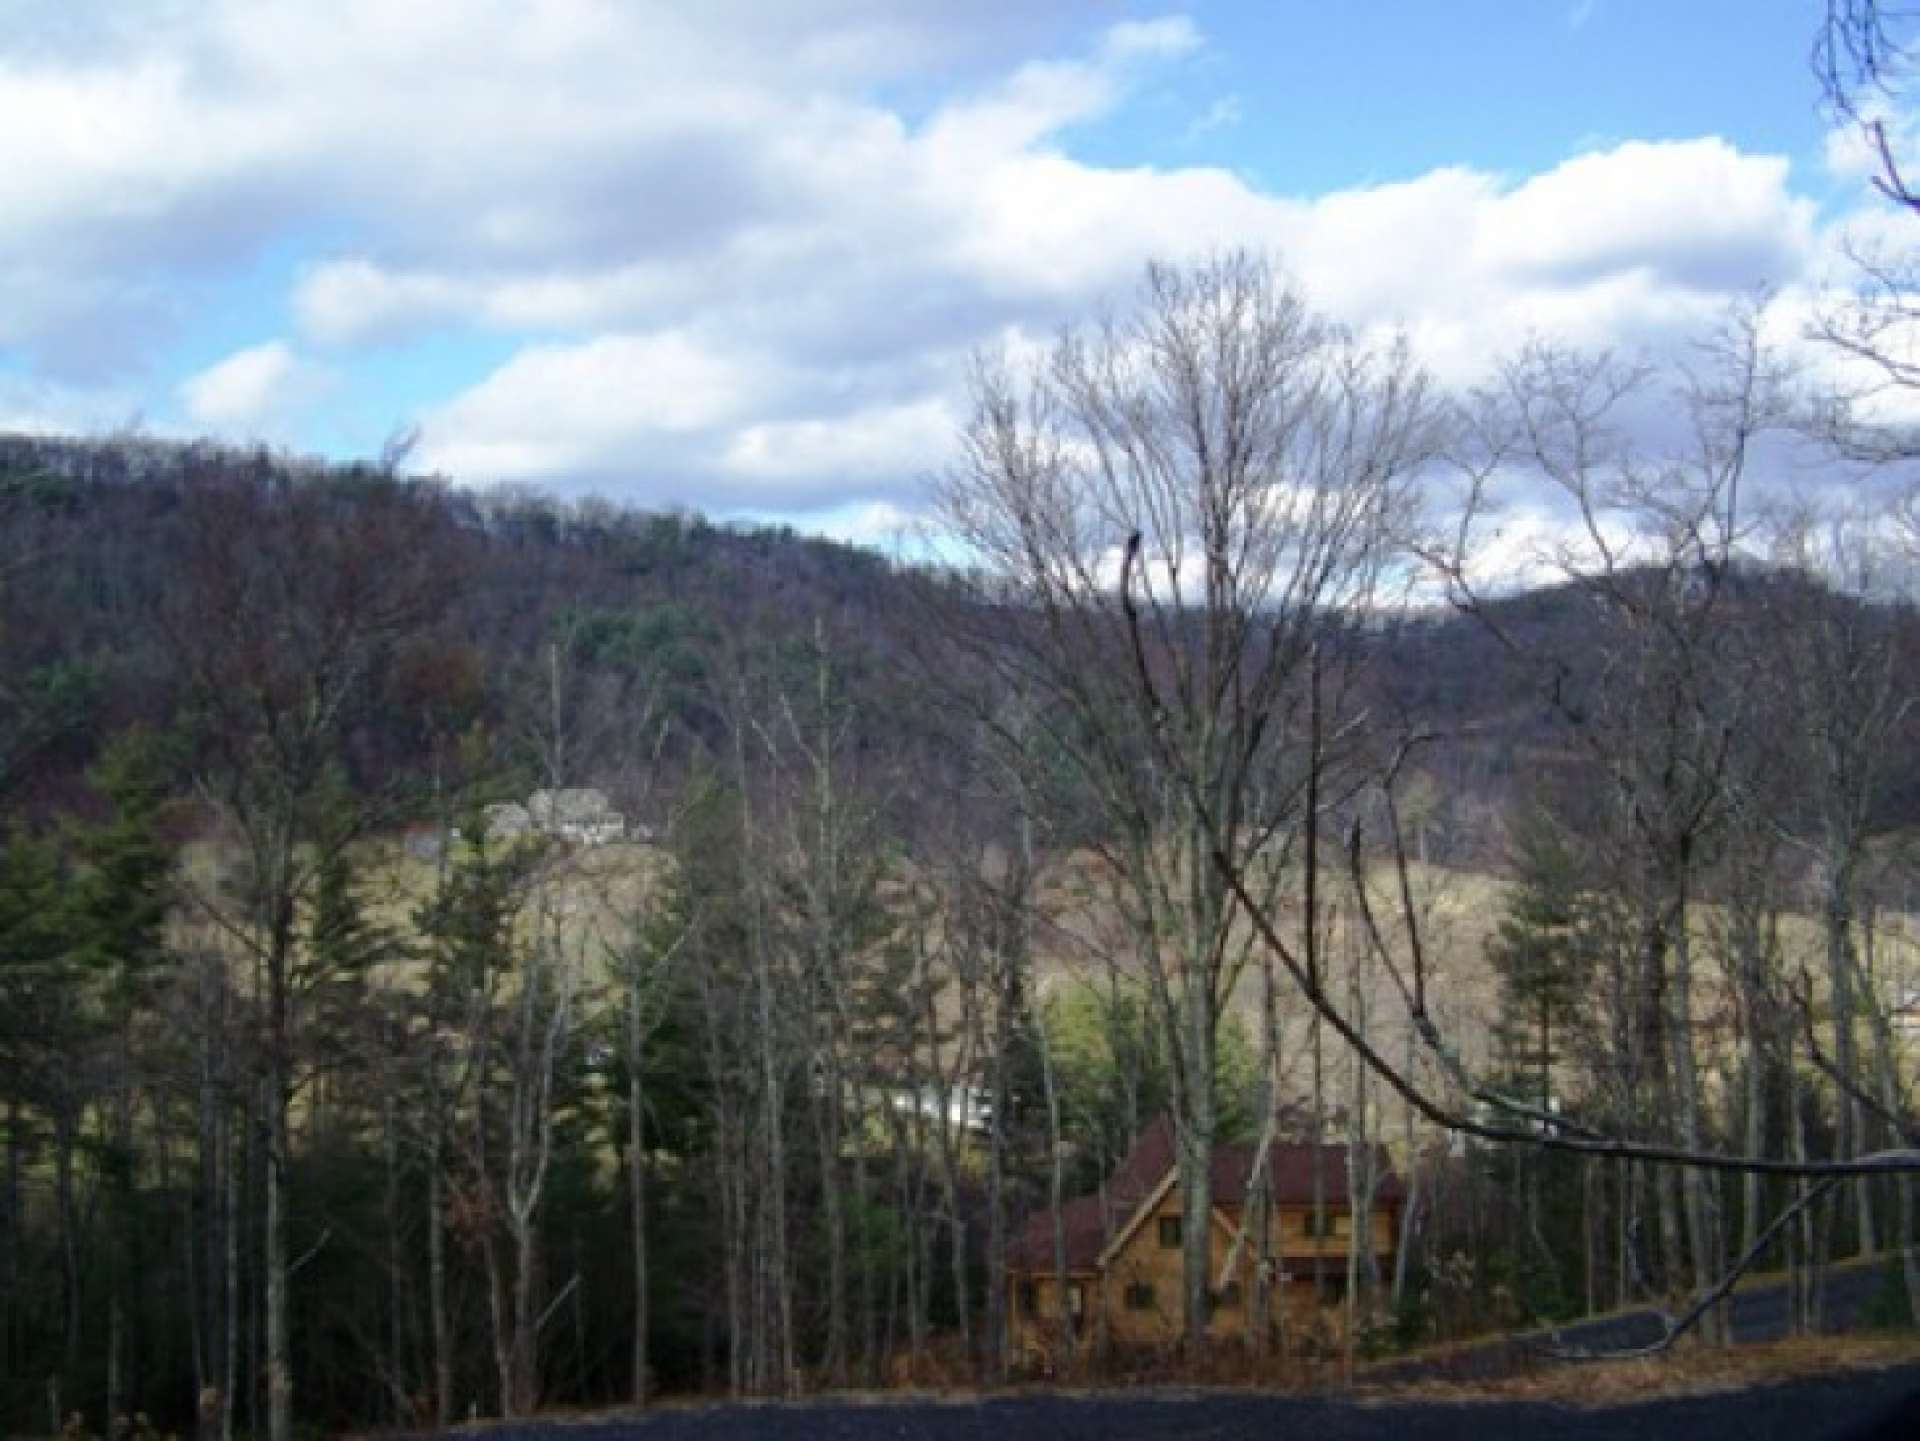 Enjoy this view from the covered porch or deck of your mountain cabin or home constructed here on lot 1.